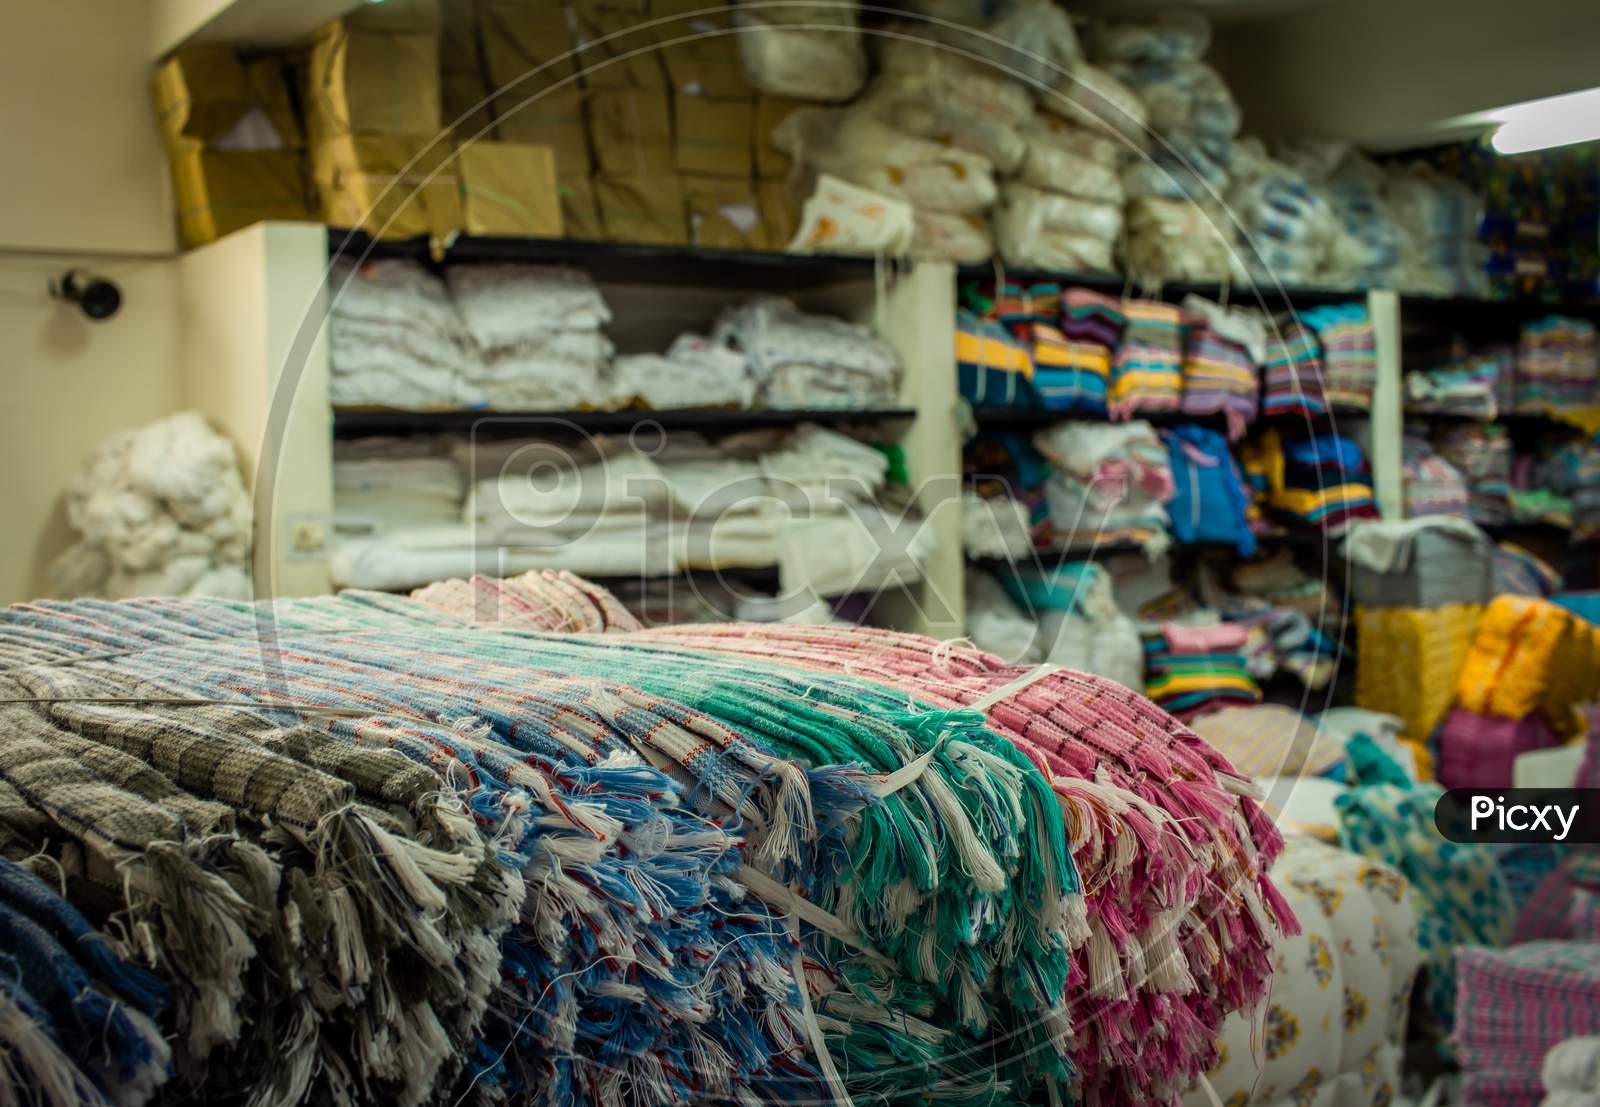 Warehouse Of A Wholesale Textiles Merchant. Warehouse Storing All The Textile Products Like Towels, Yarns And Fabrics.